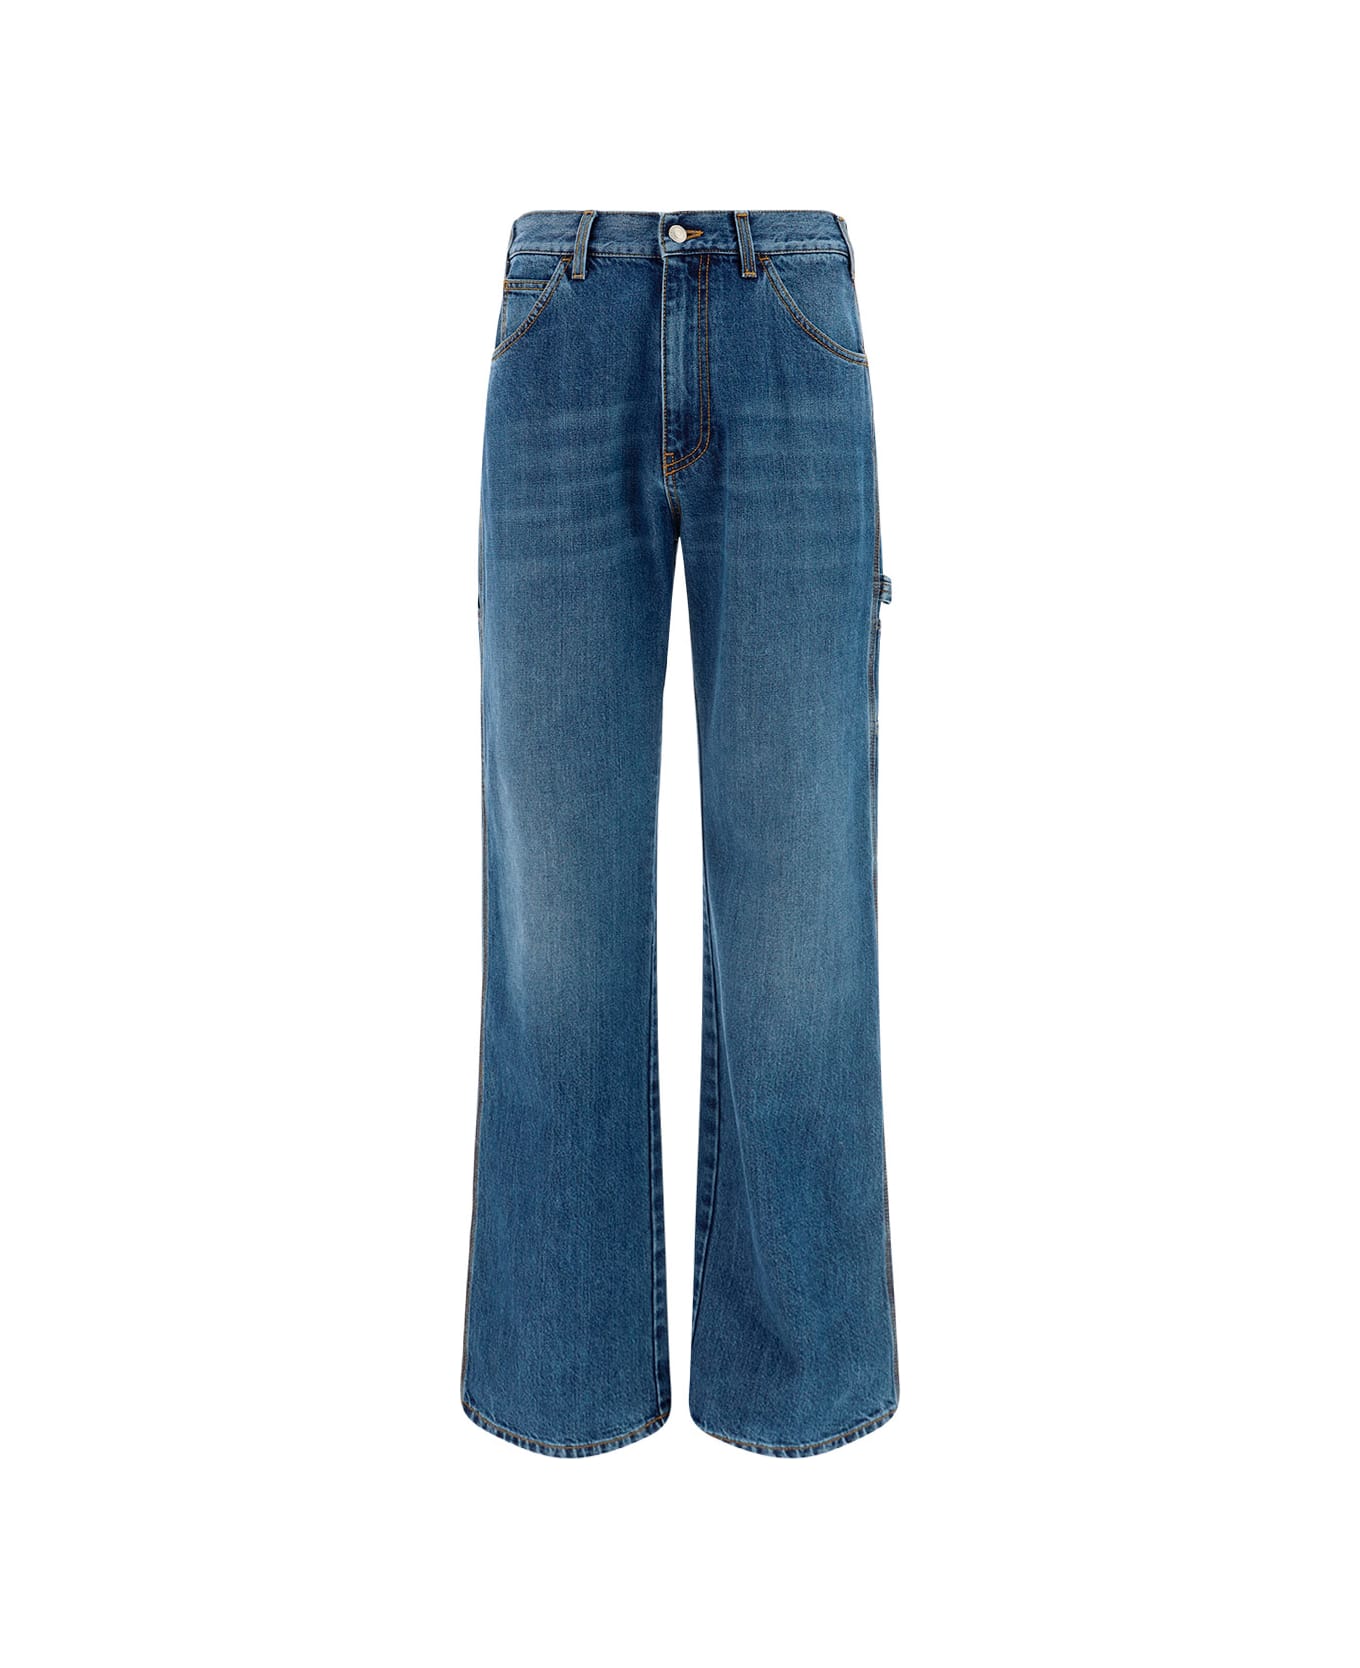 Alexander McQueen Straight Buttoned Jeans - Blue Washed